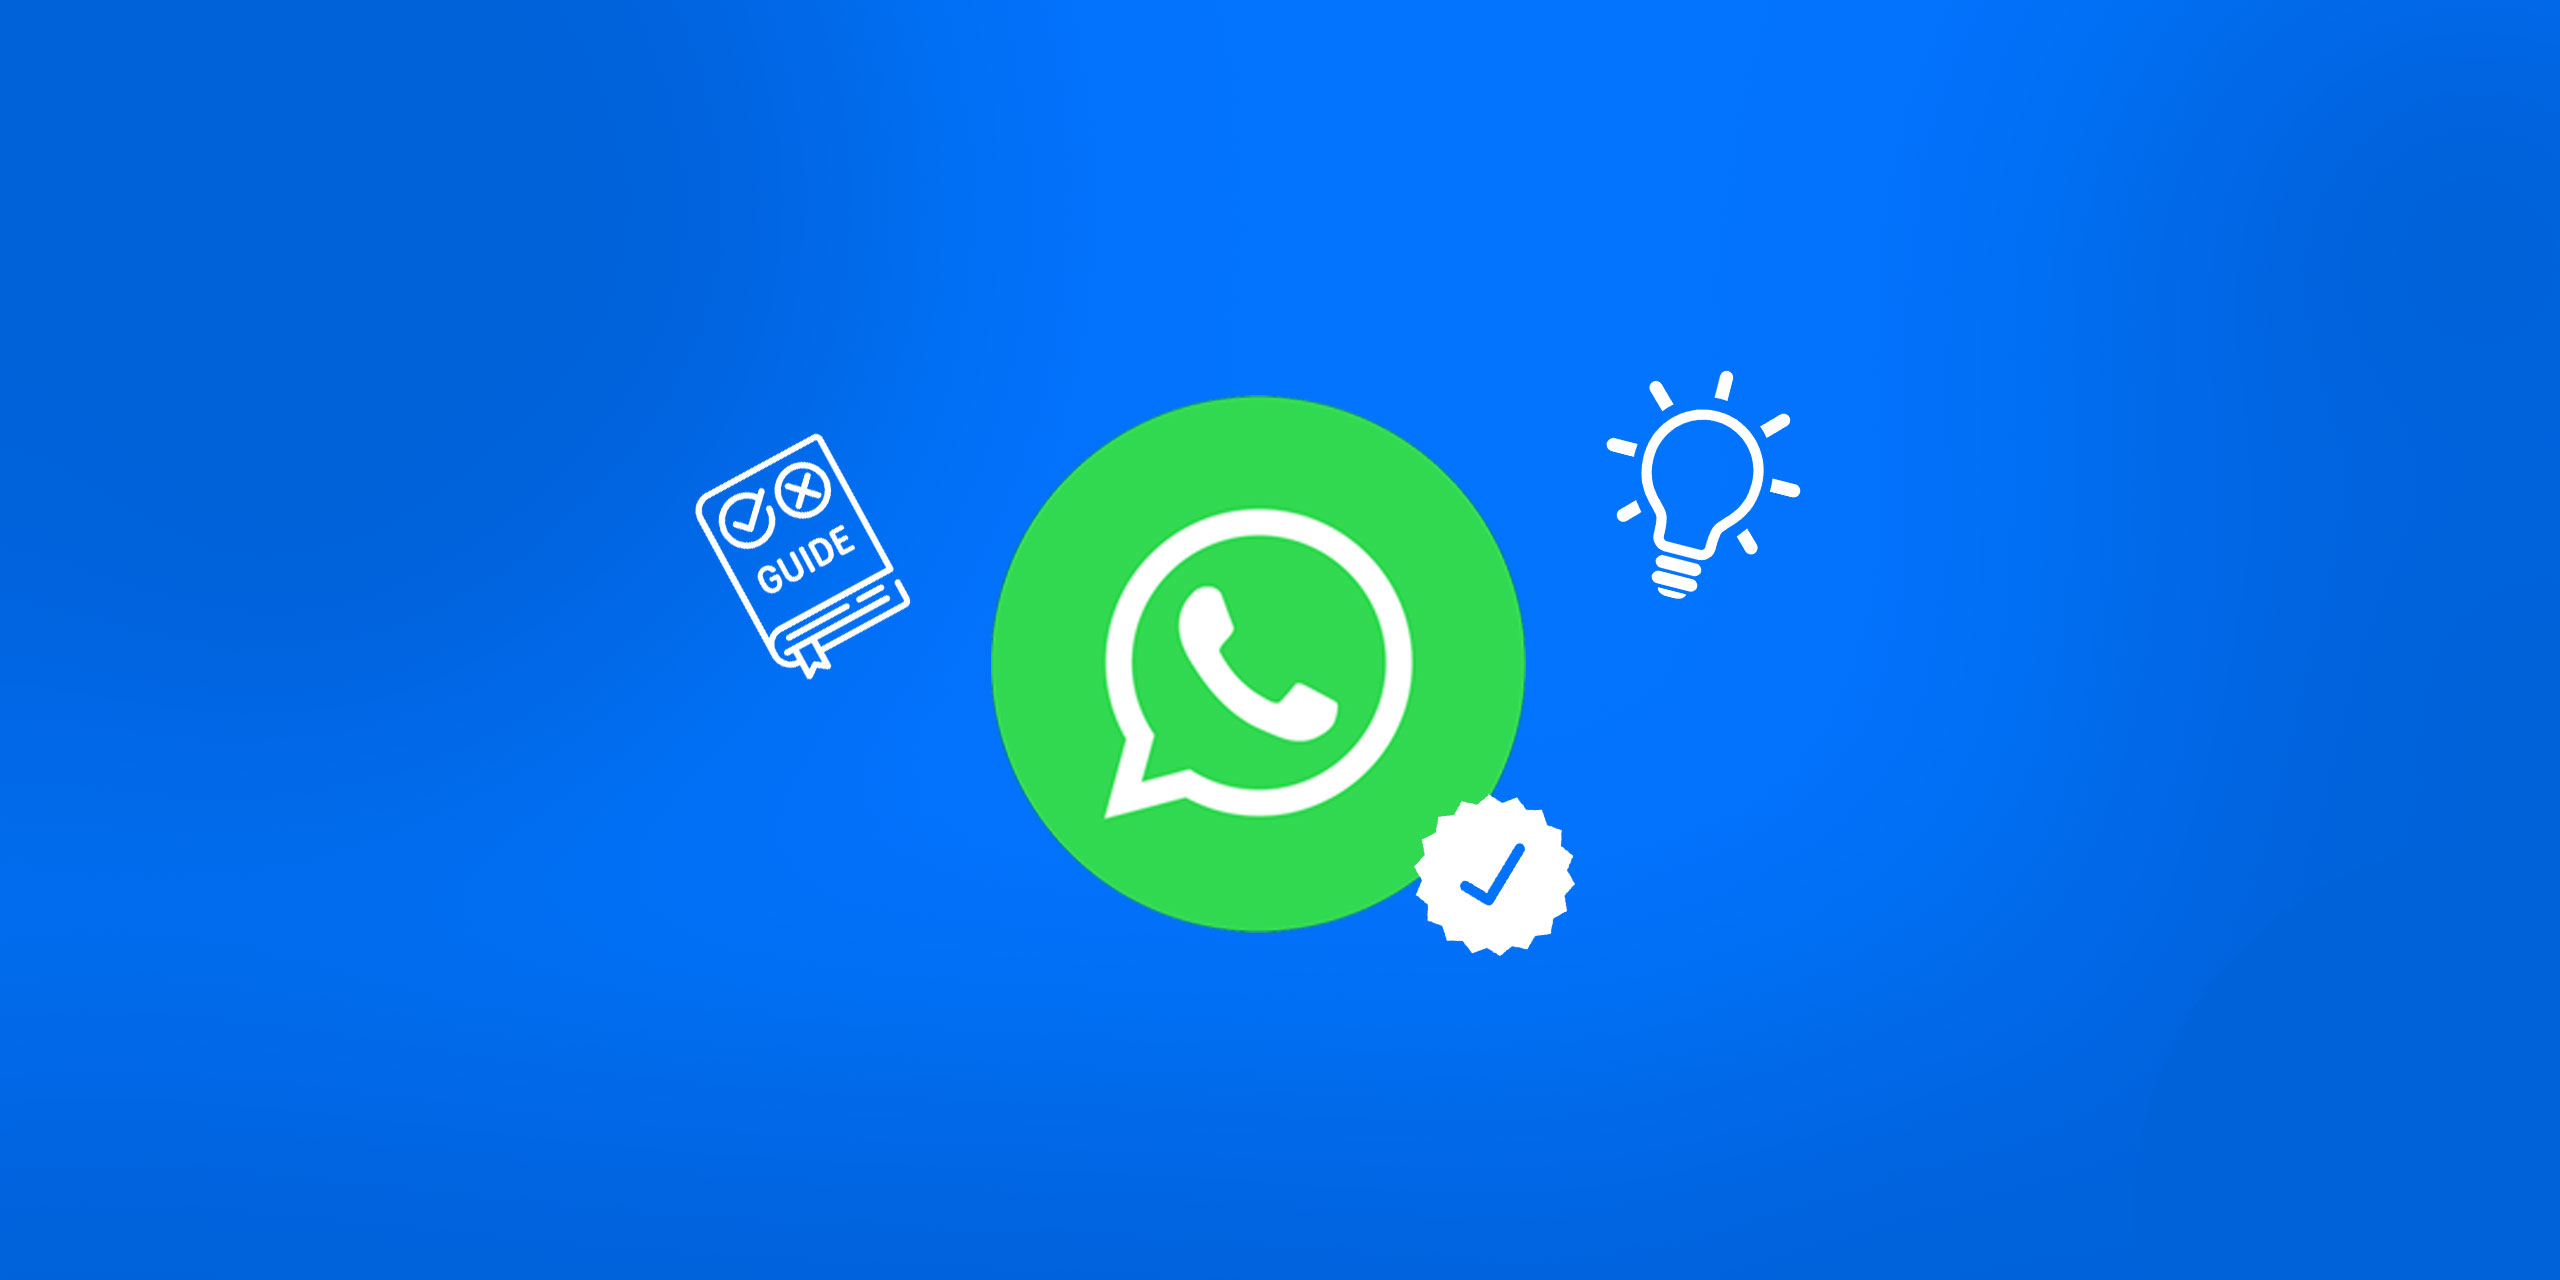 How to get verified on whatsapp business in Dubai